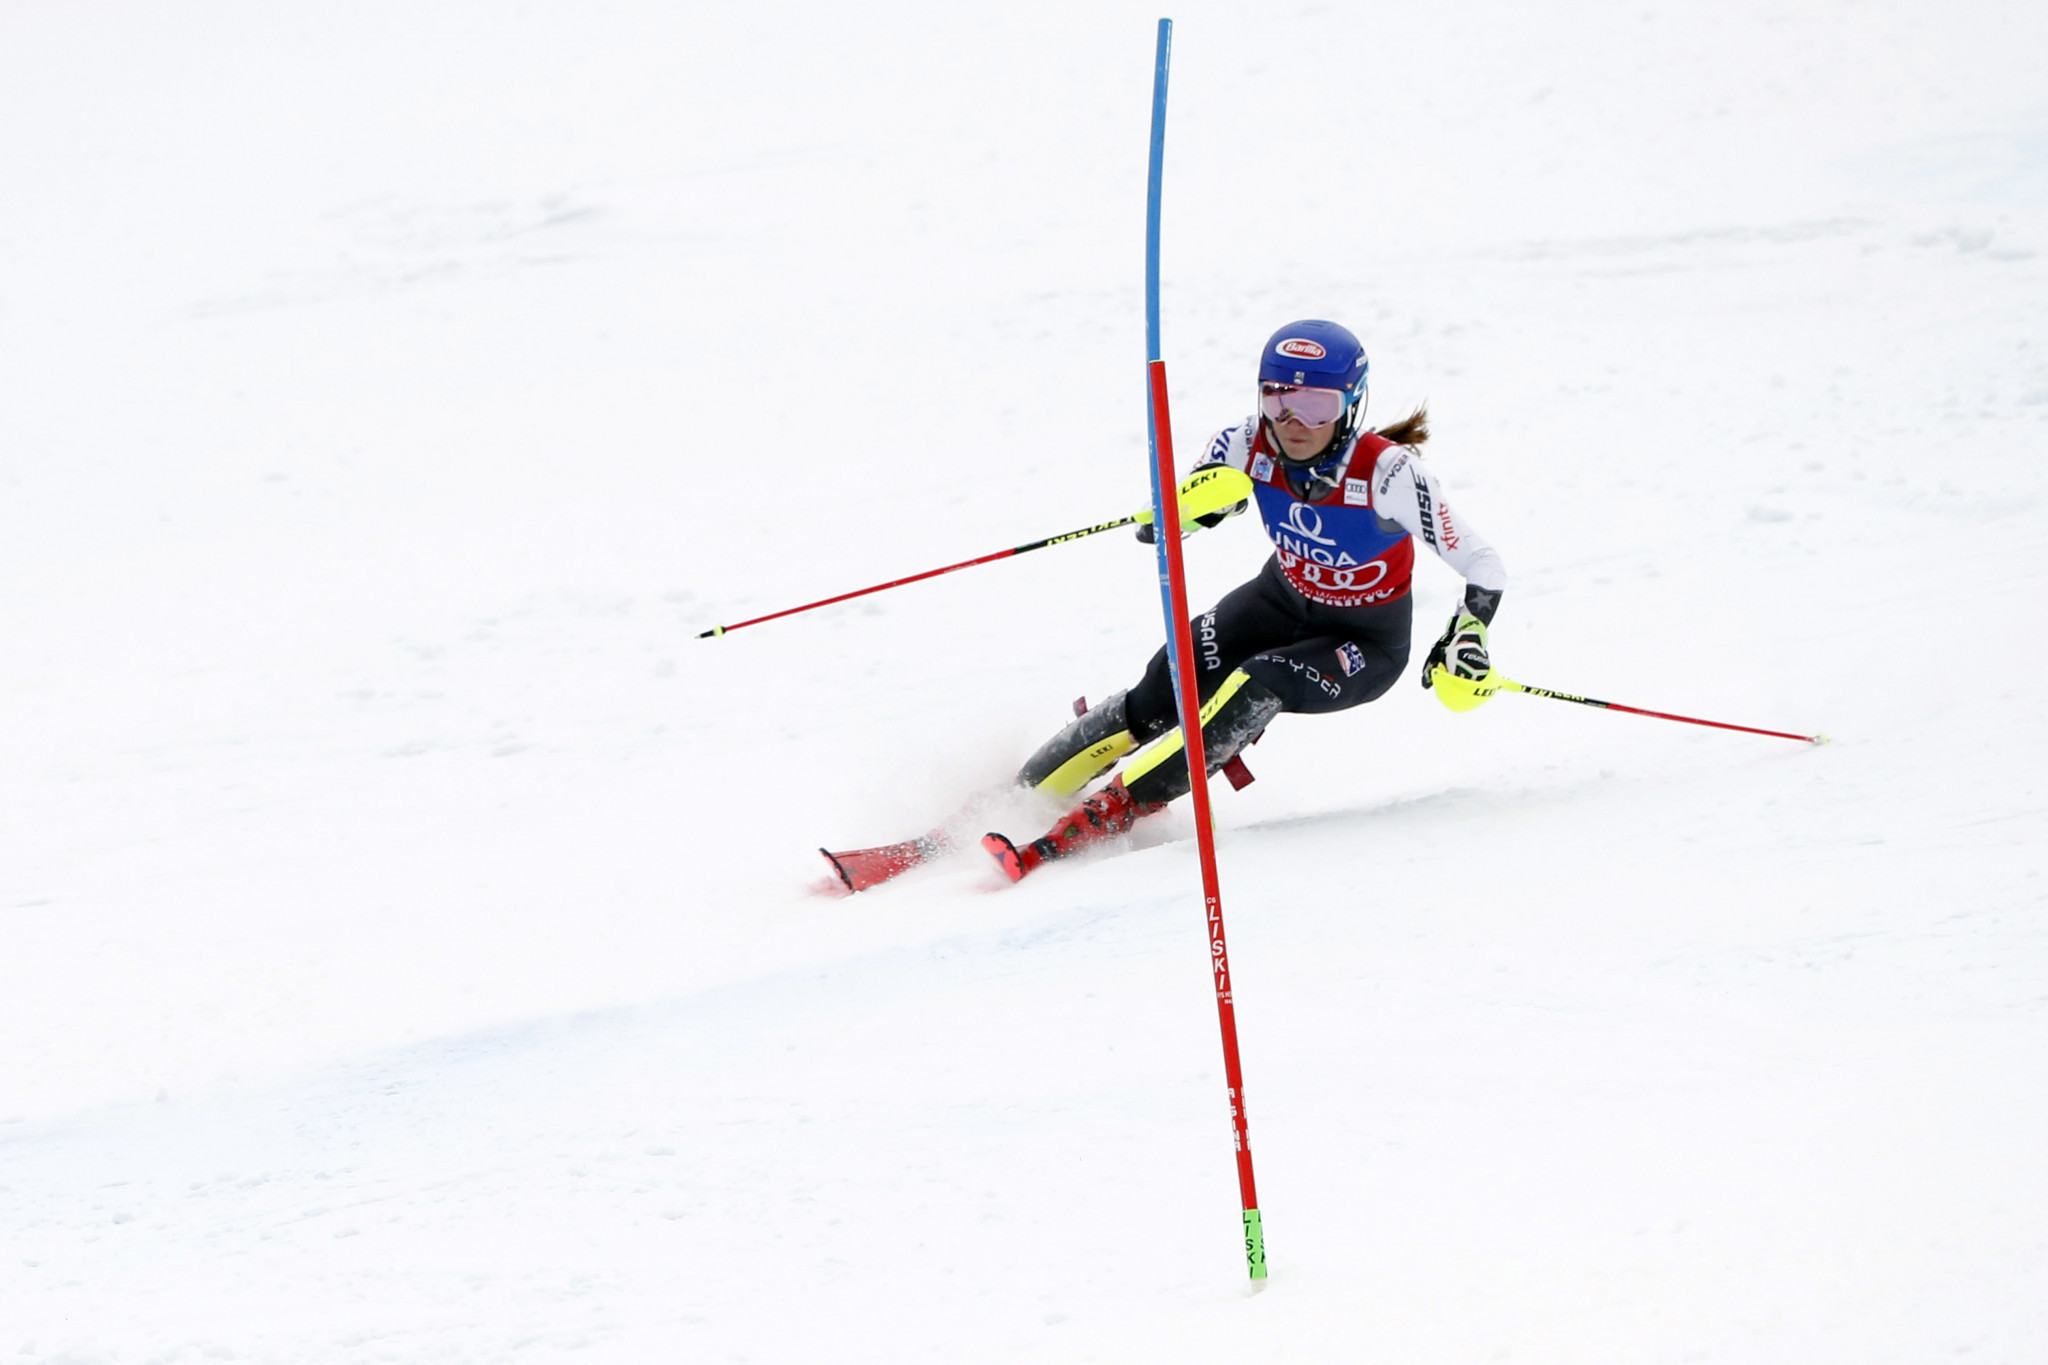 Shiffrin looks to continue form at FIS Alpine Skiing World Cup city event in Oslo